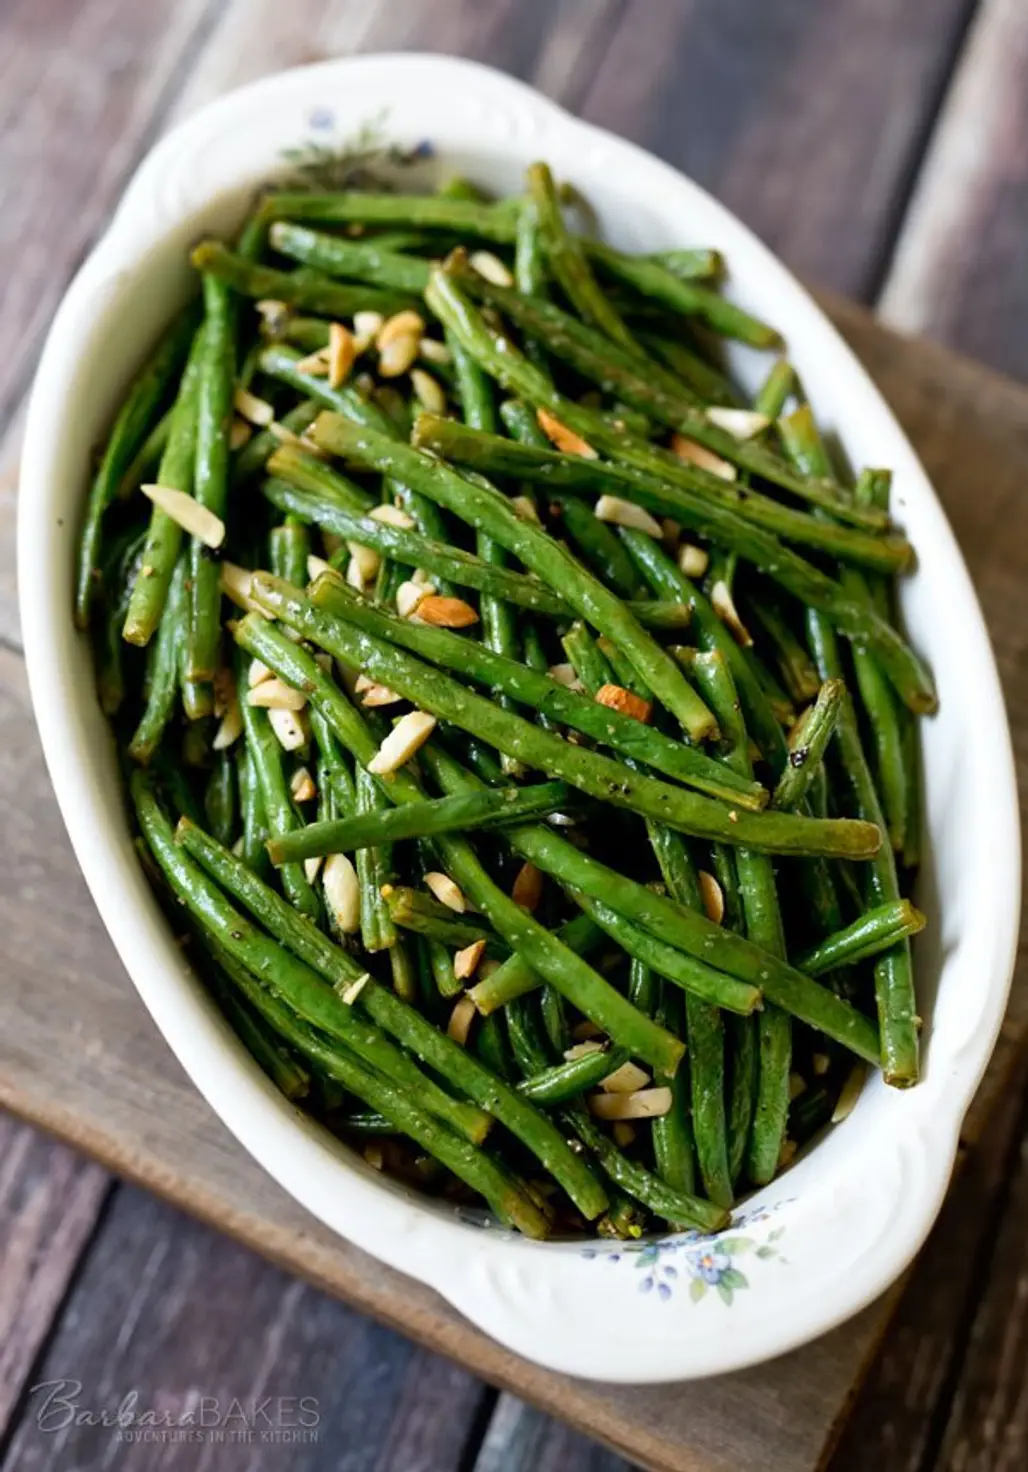 Add Almonds and Balsamic Vinaigrette to Your Green Beans